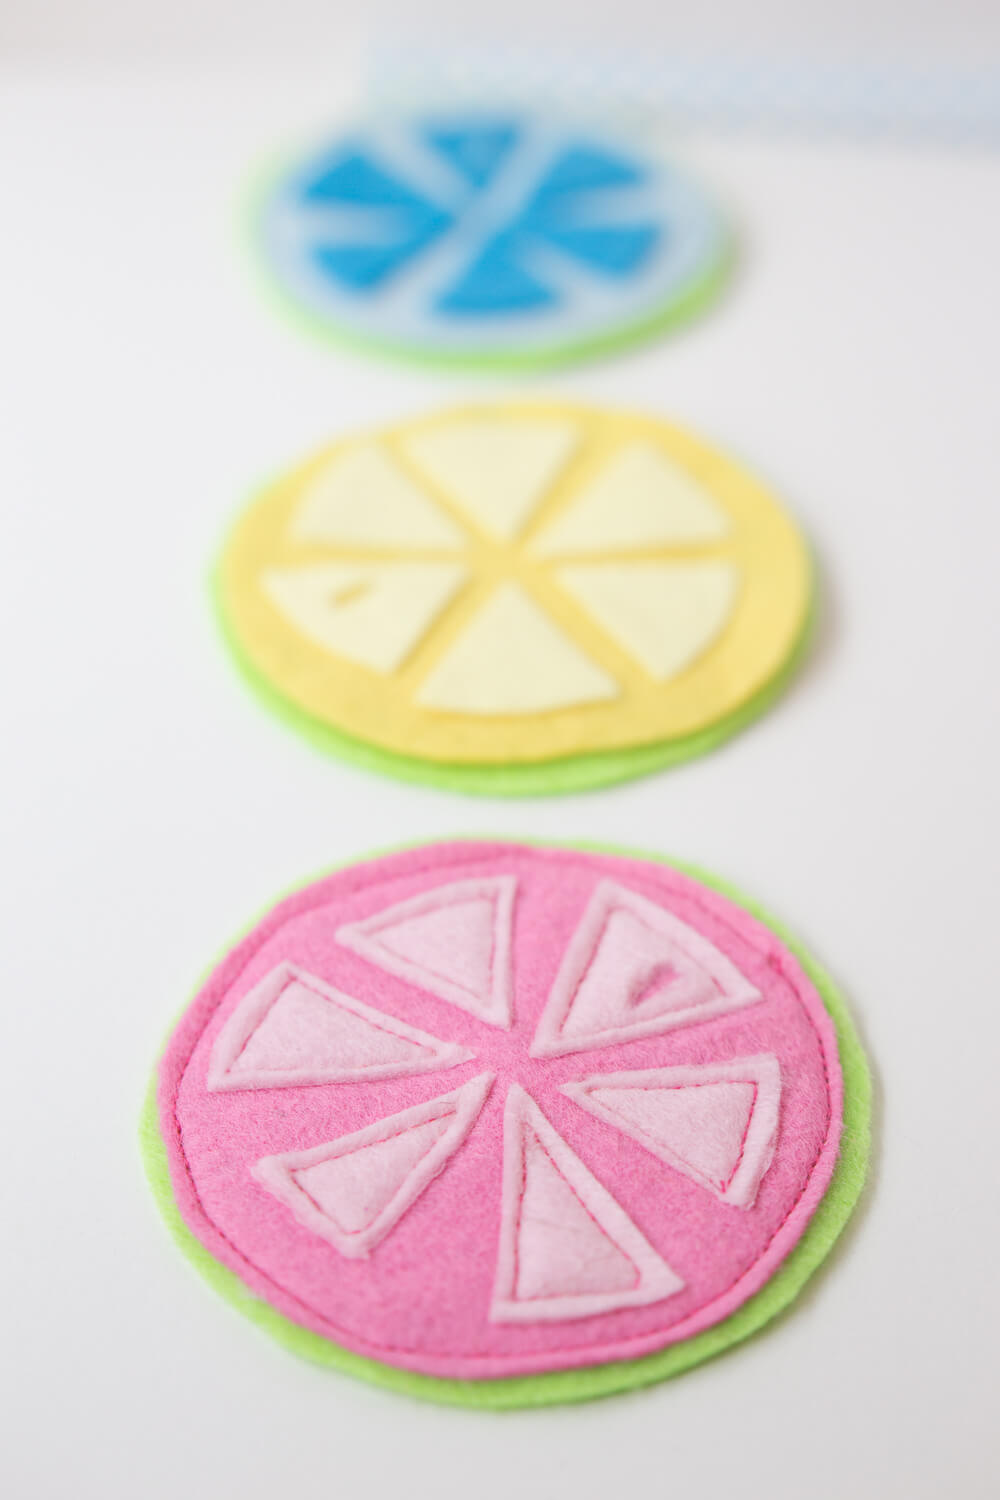 Citrus Coasters - lined up, ready to use!